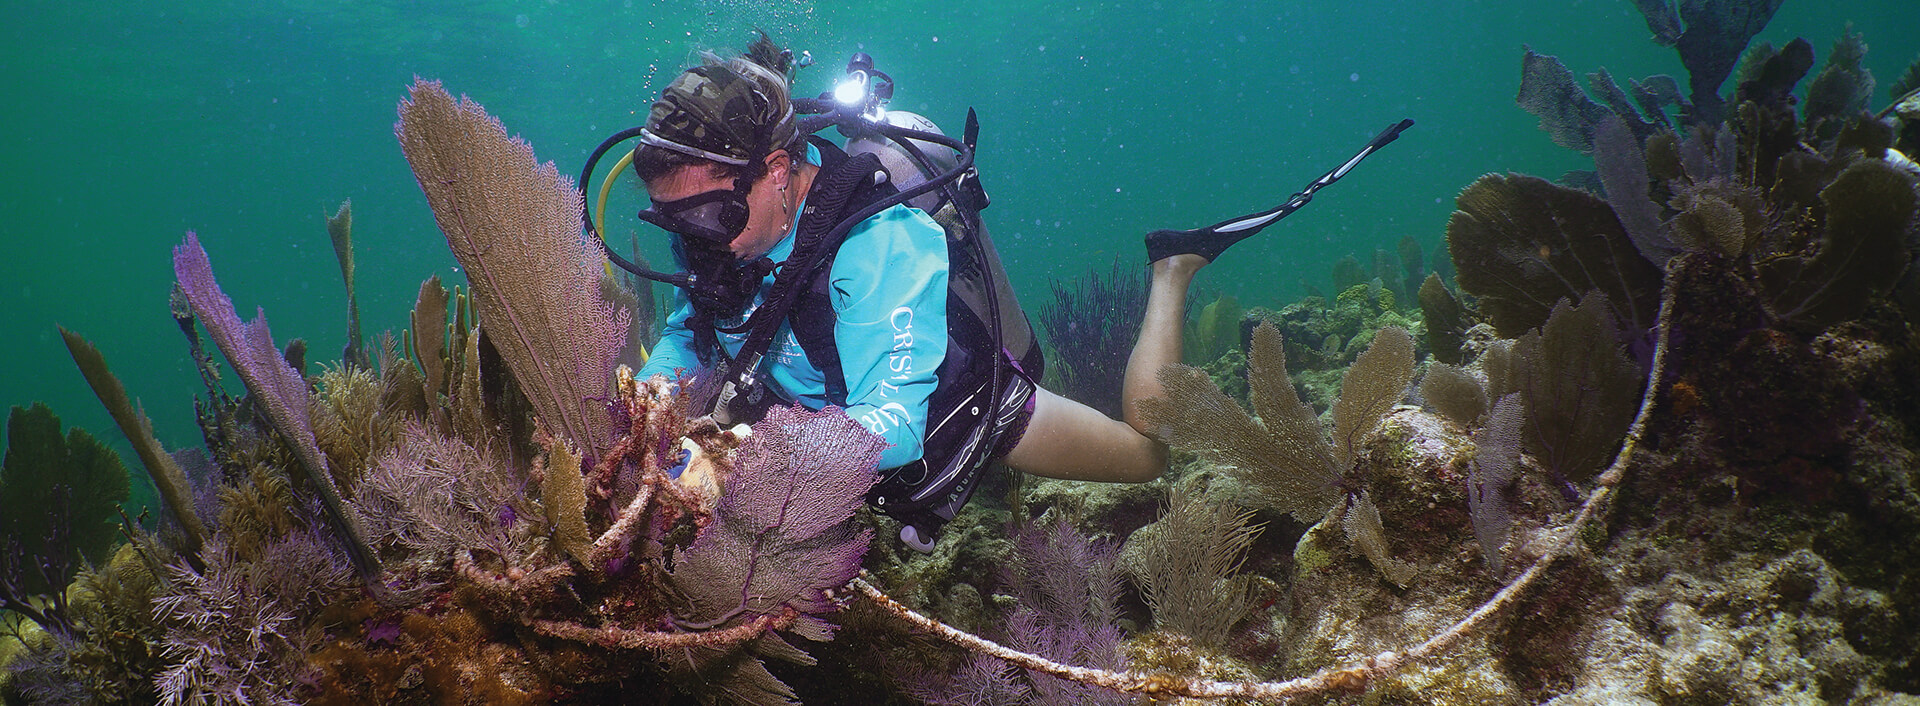 A snorkeler observing a shipwreck just beneath the surface